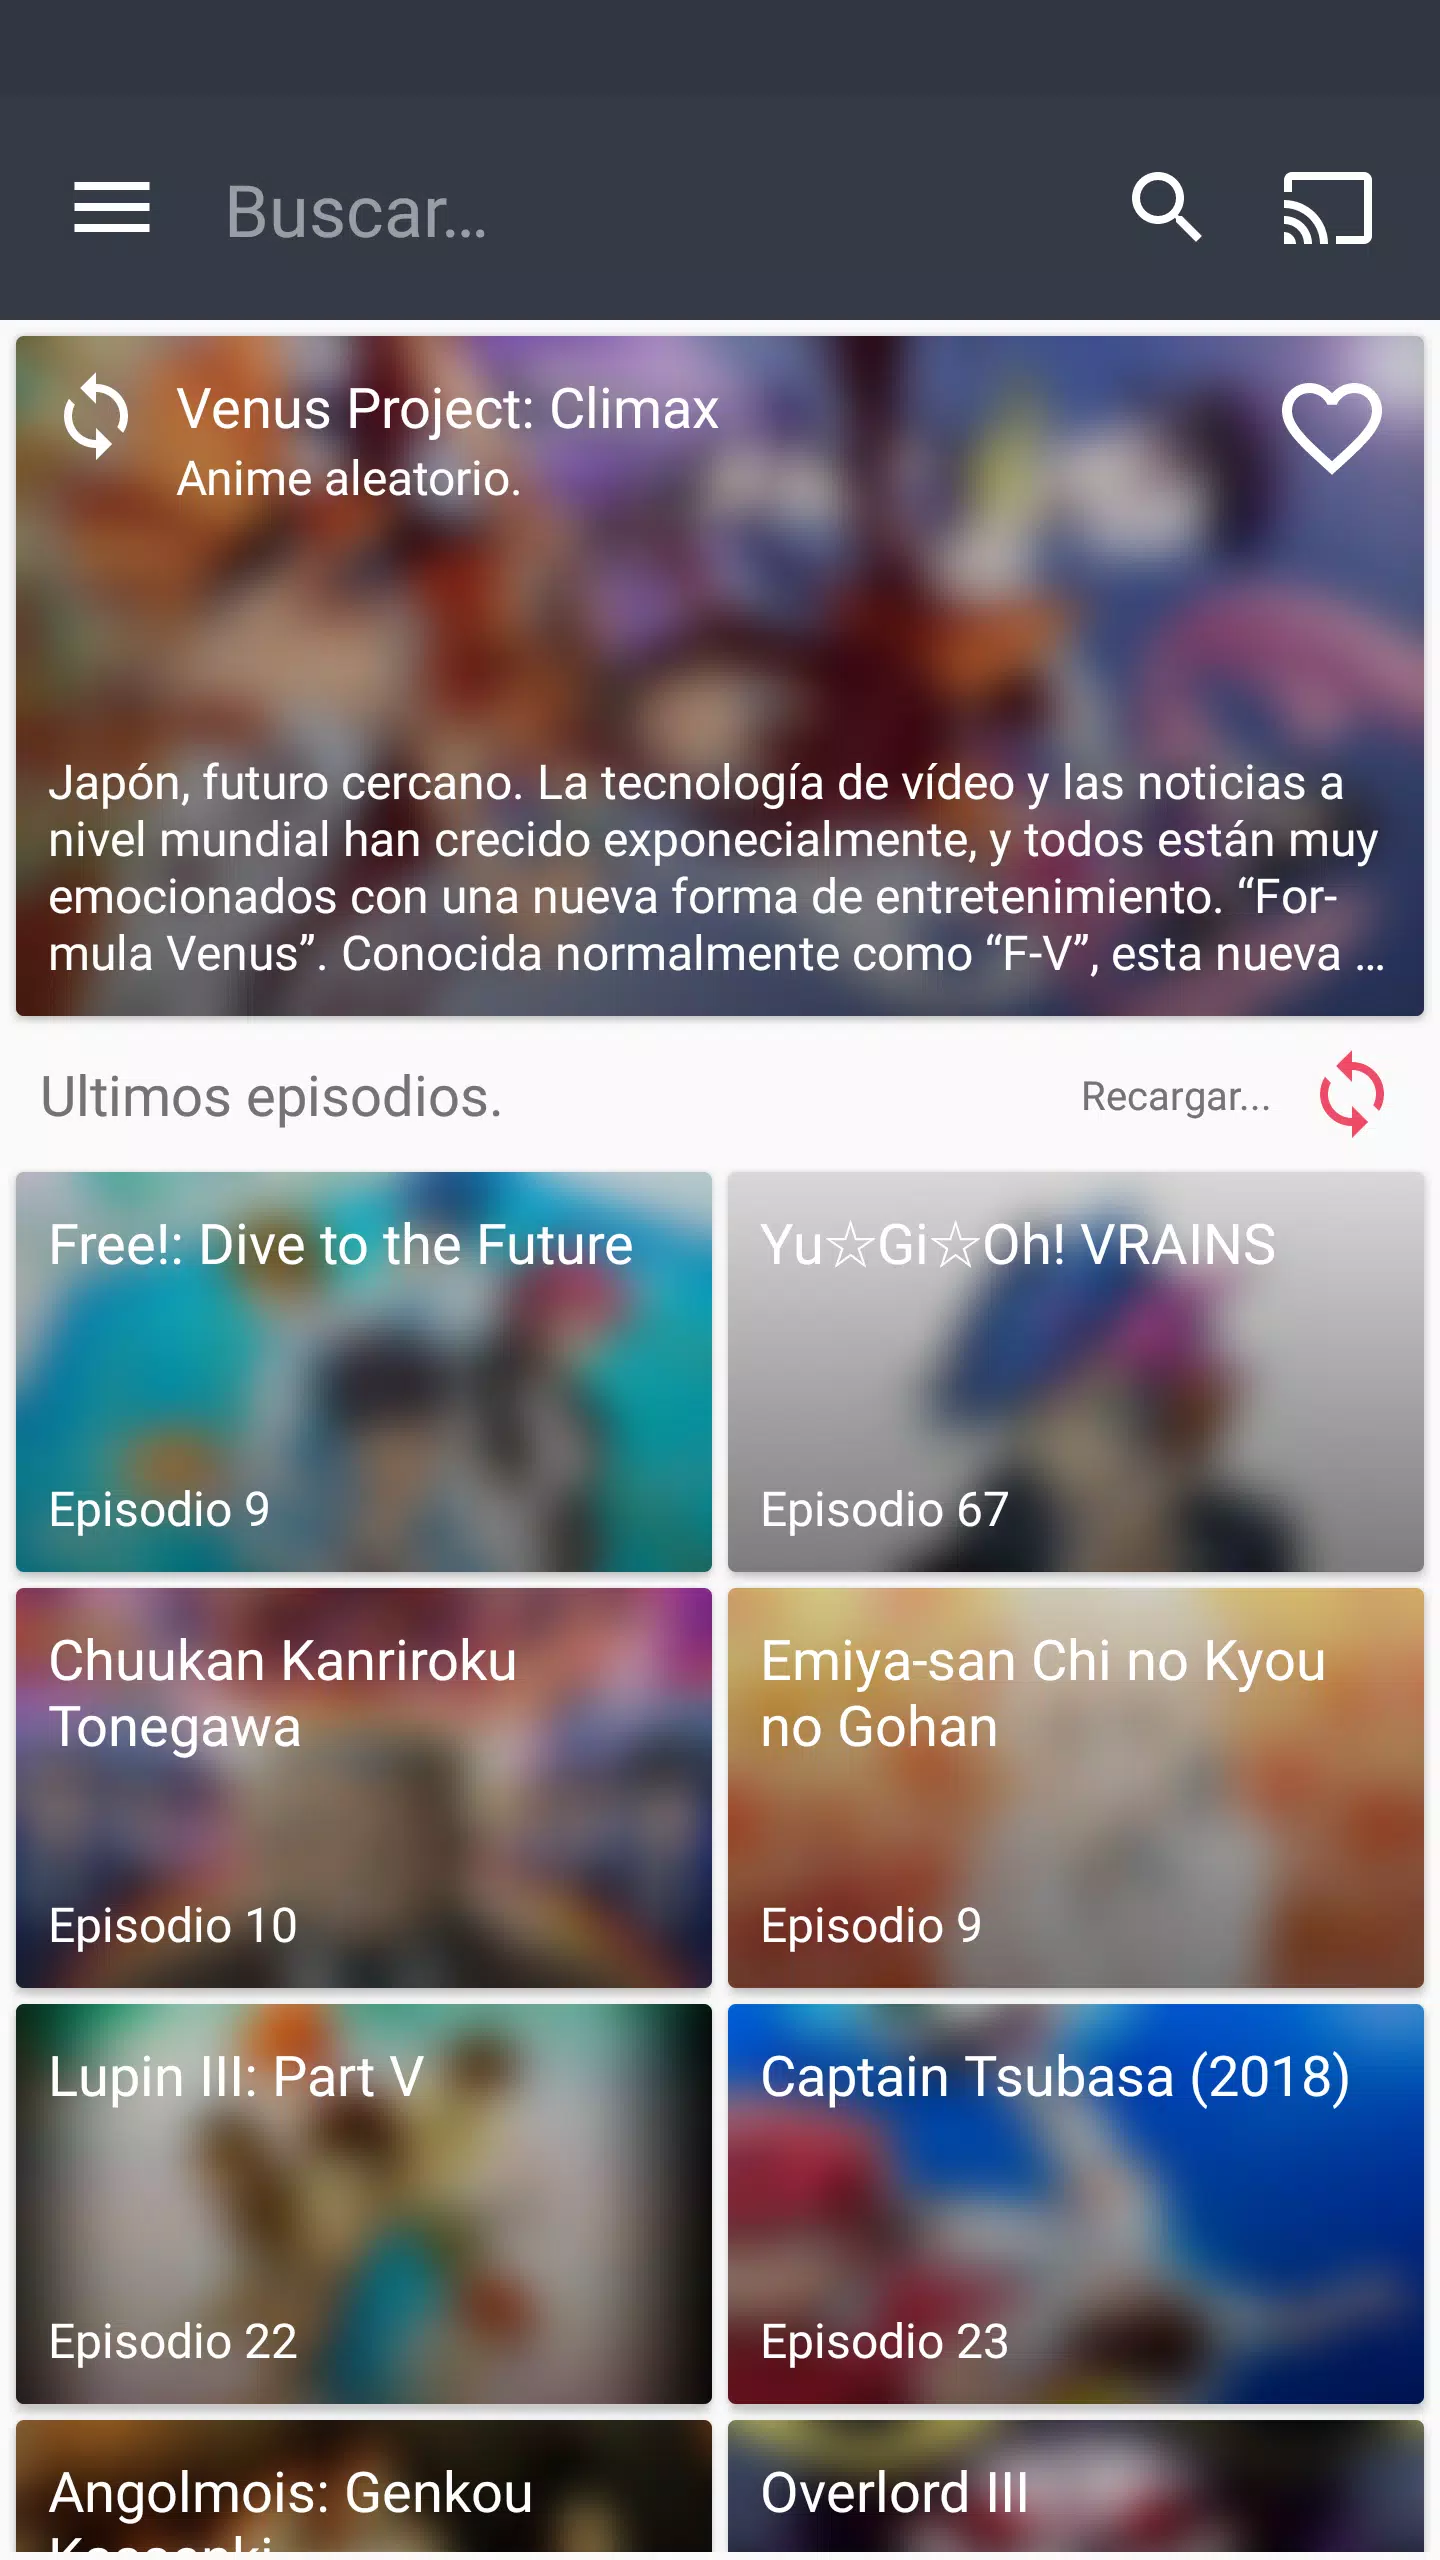 AnimeFlix APK for Android [Latest, Dec 23] Download